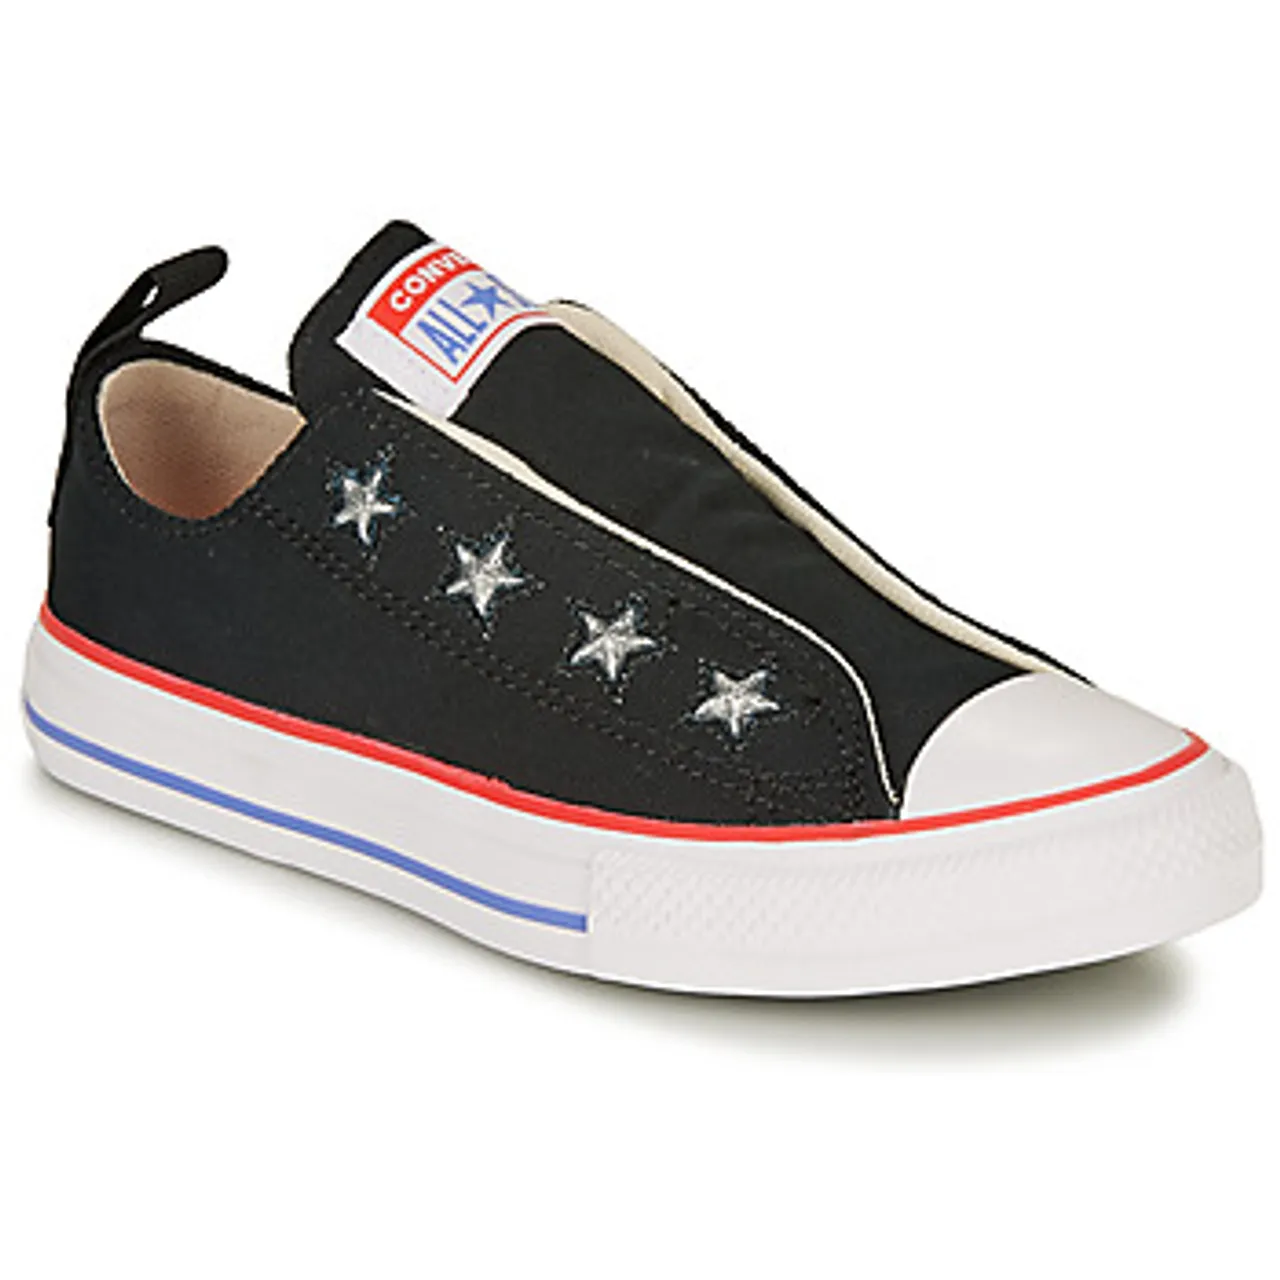 Converse  CHUCK TAYLOR ALL STAR TEEN SLIP CANVAS COLOR - SLIP  girls's Children's Shoes (Trainers) in multicolour